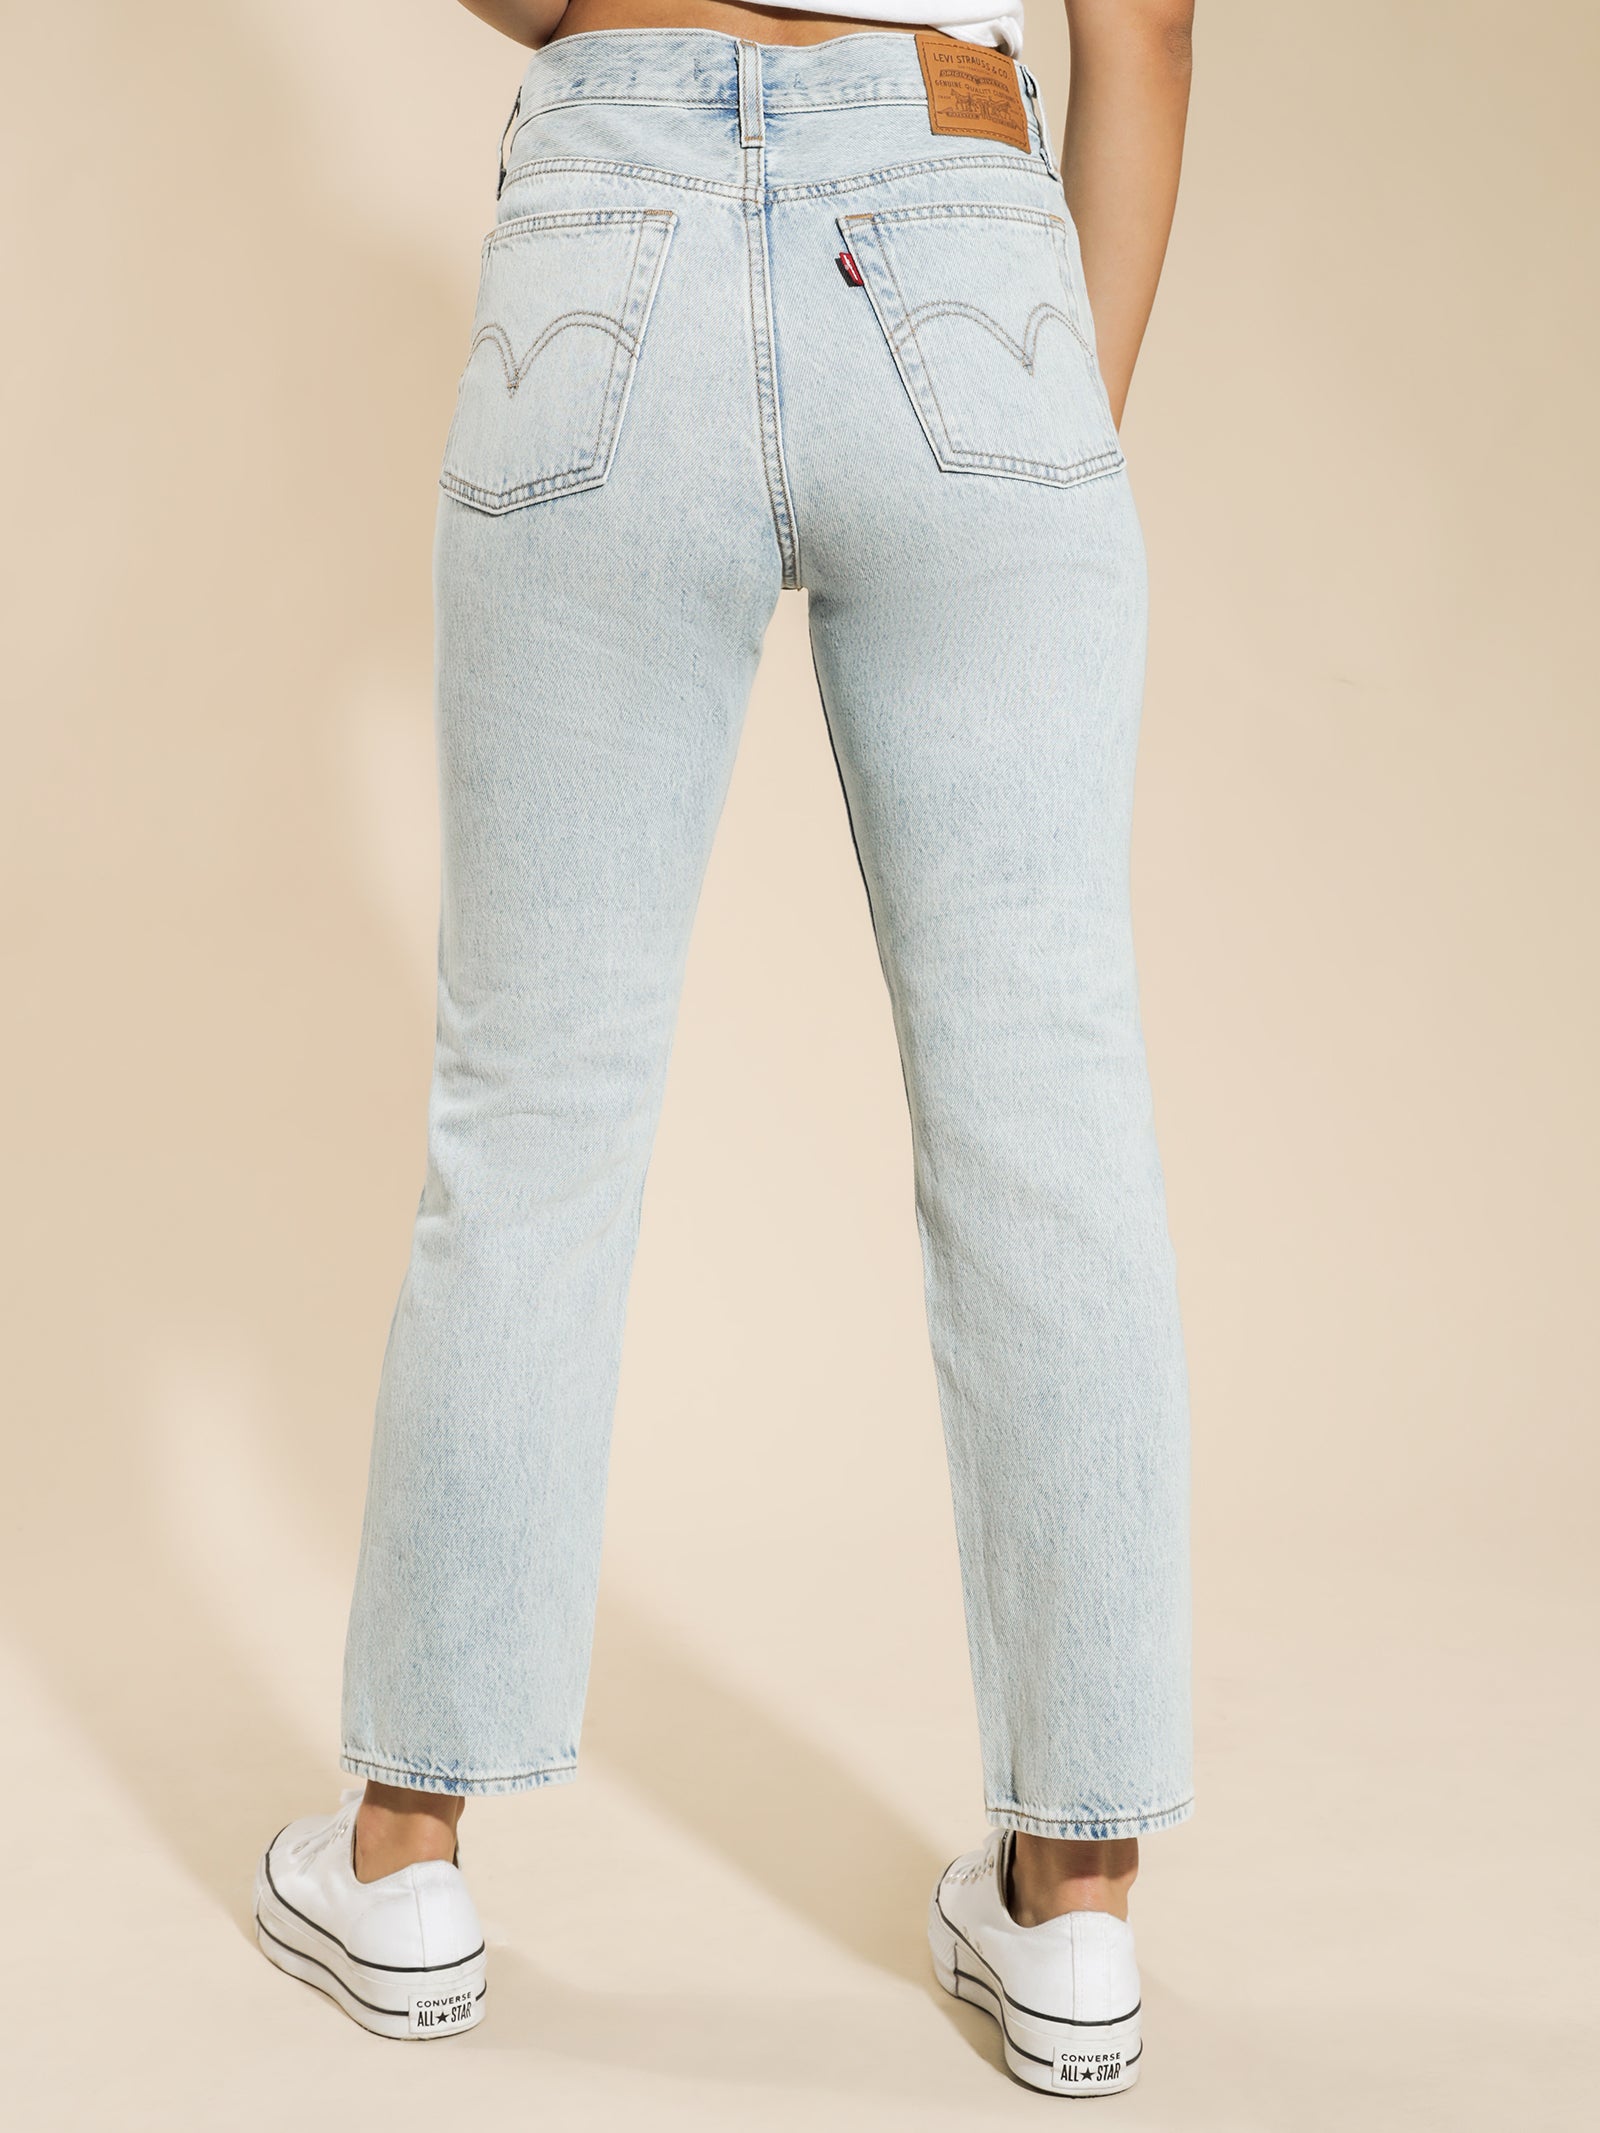 Wedgie Fit Straight Jeans in Montgomery Baked - Glue Store